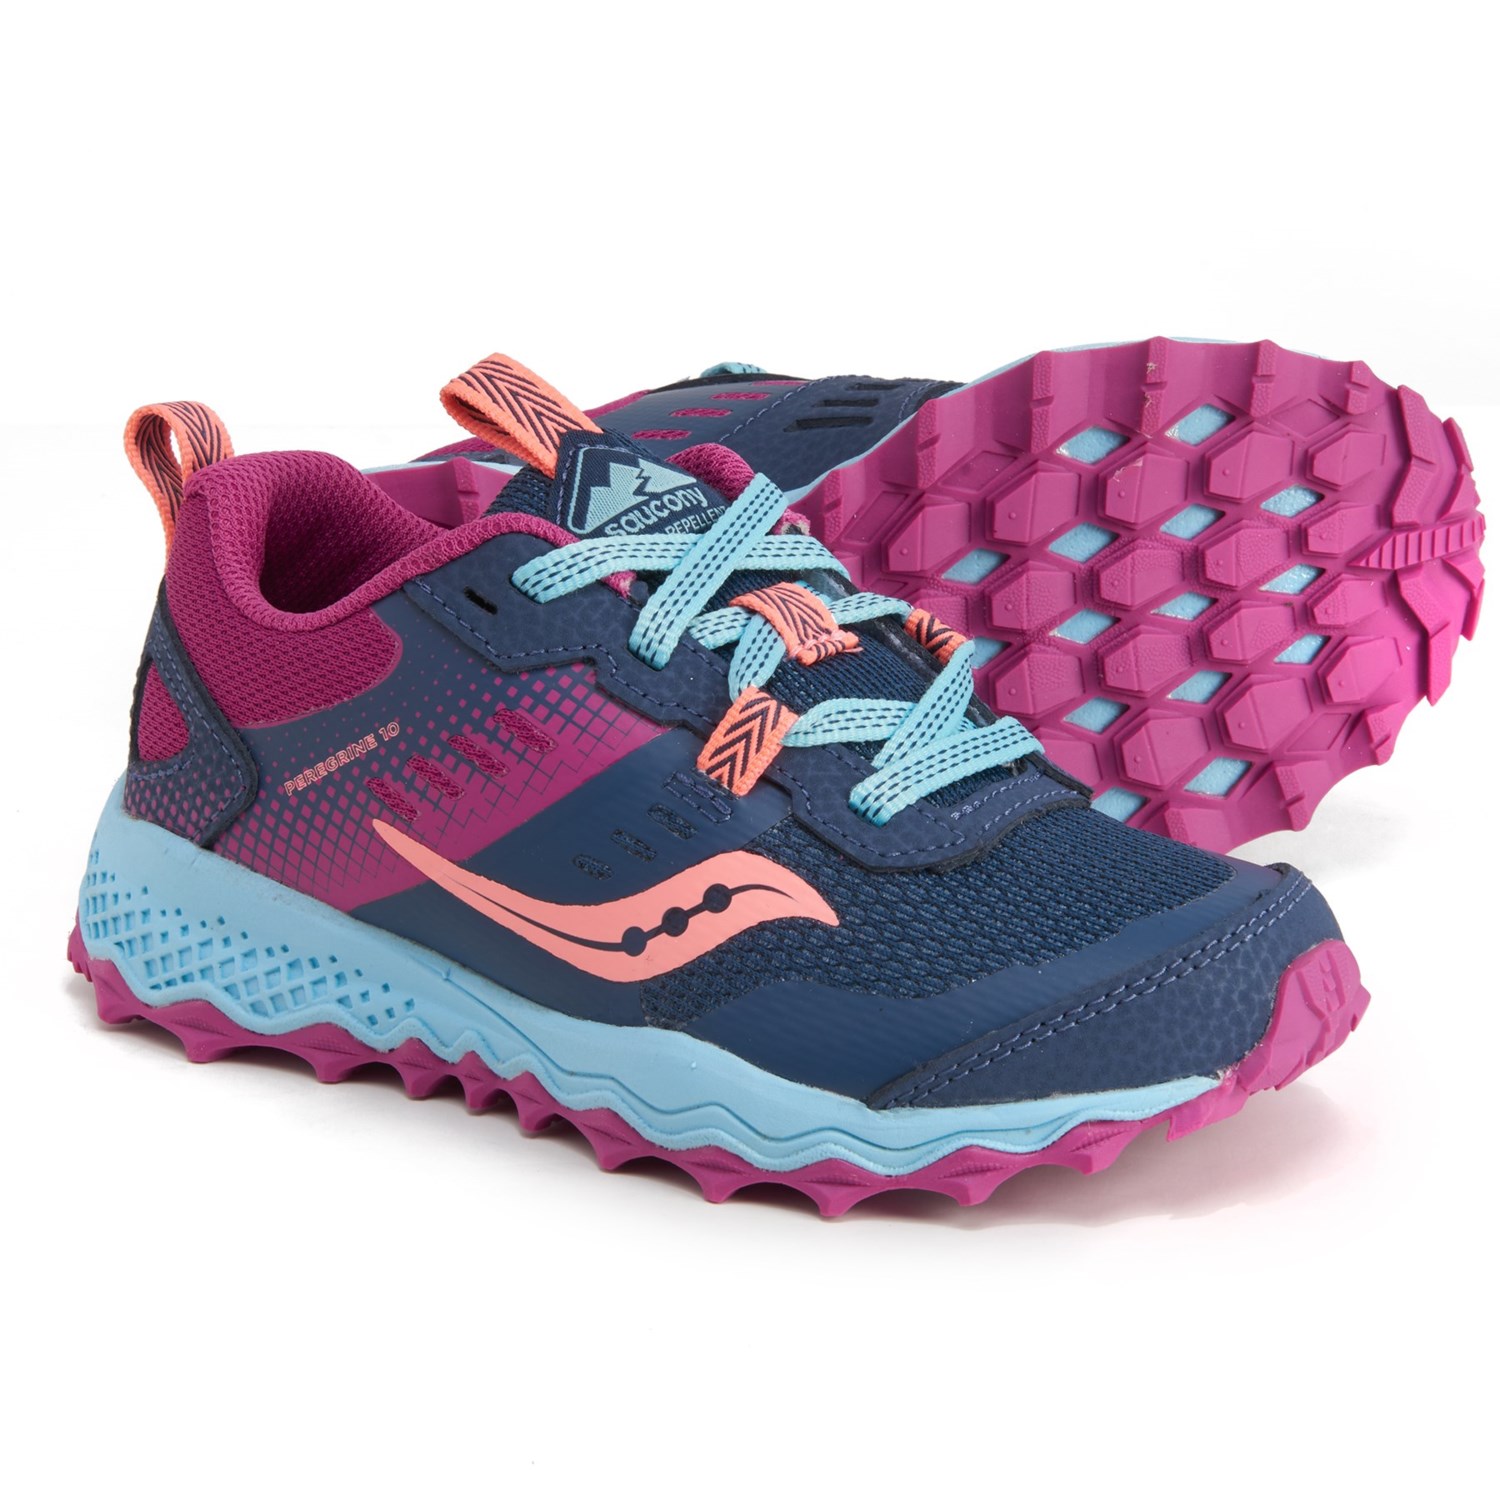 saucony shoes for girls